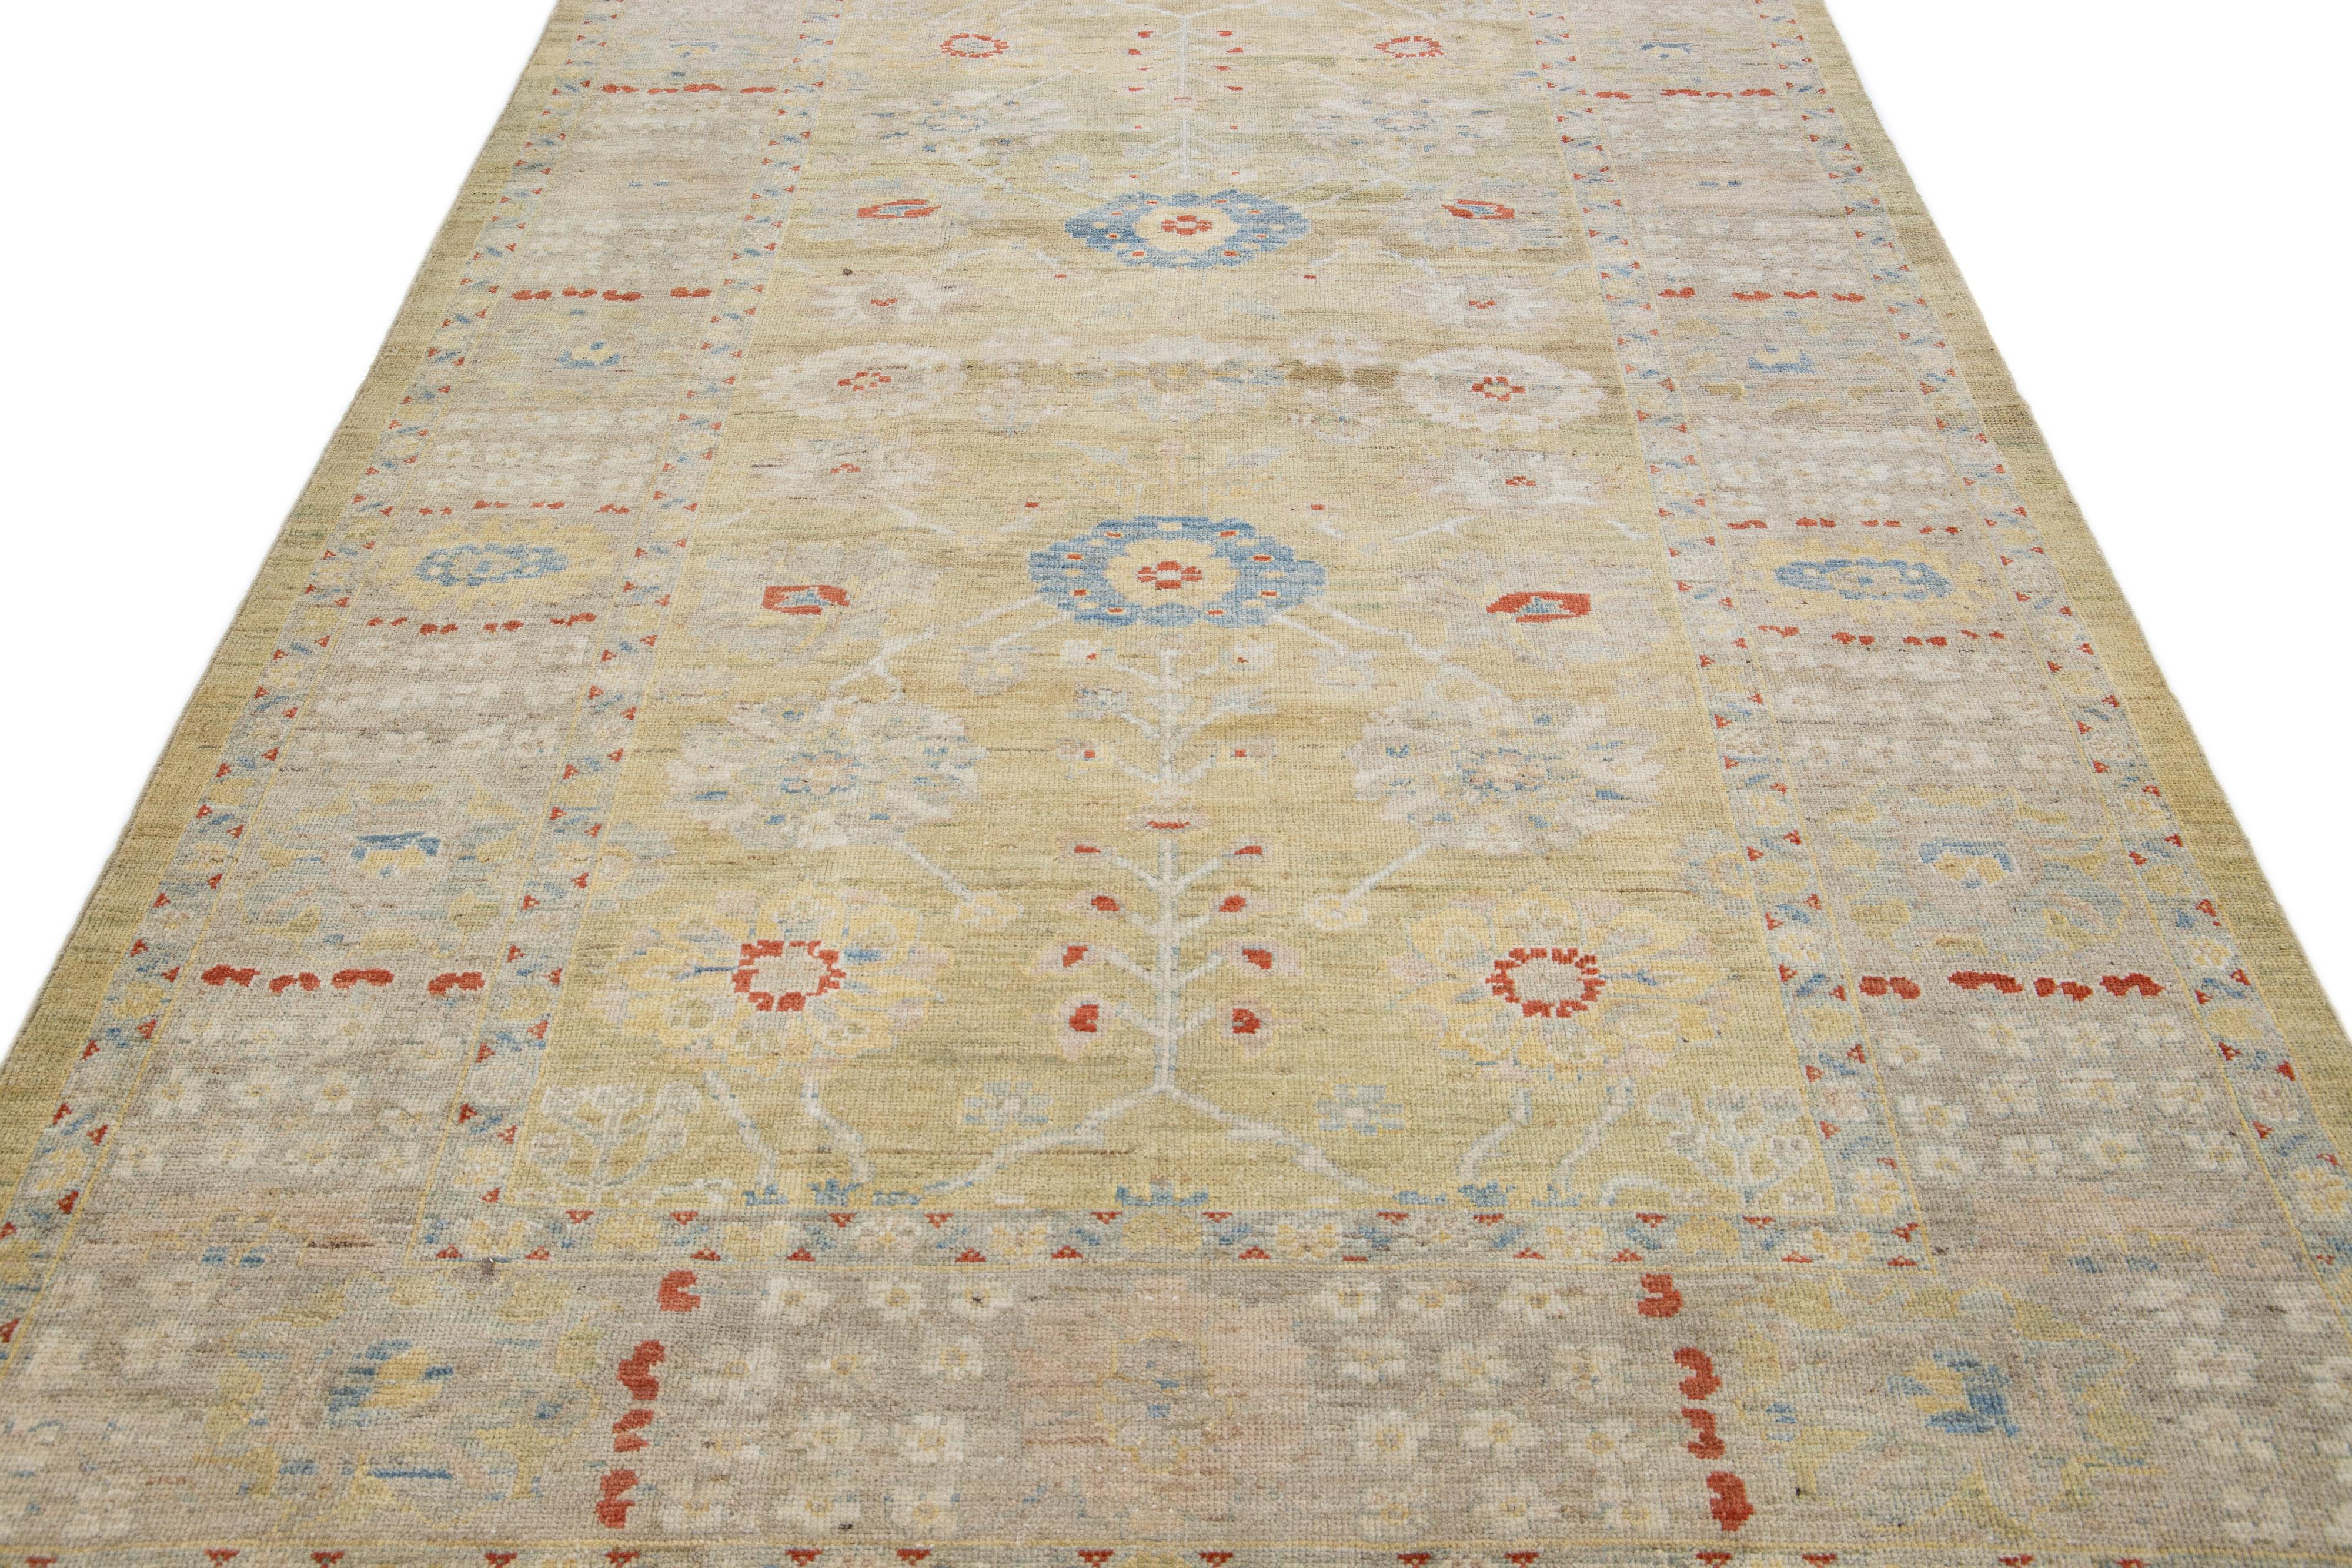 Beautiful modern Sultanabad hand-knotted wool rug with a yellow color field. This rug has a tan designed-frame with multicolor accents in a gorgeous all-over floral design.

This rug measures: 6'2